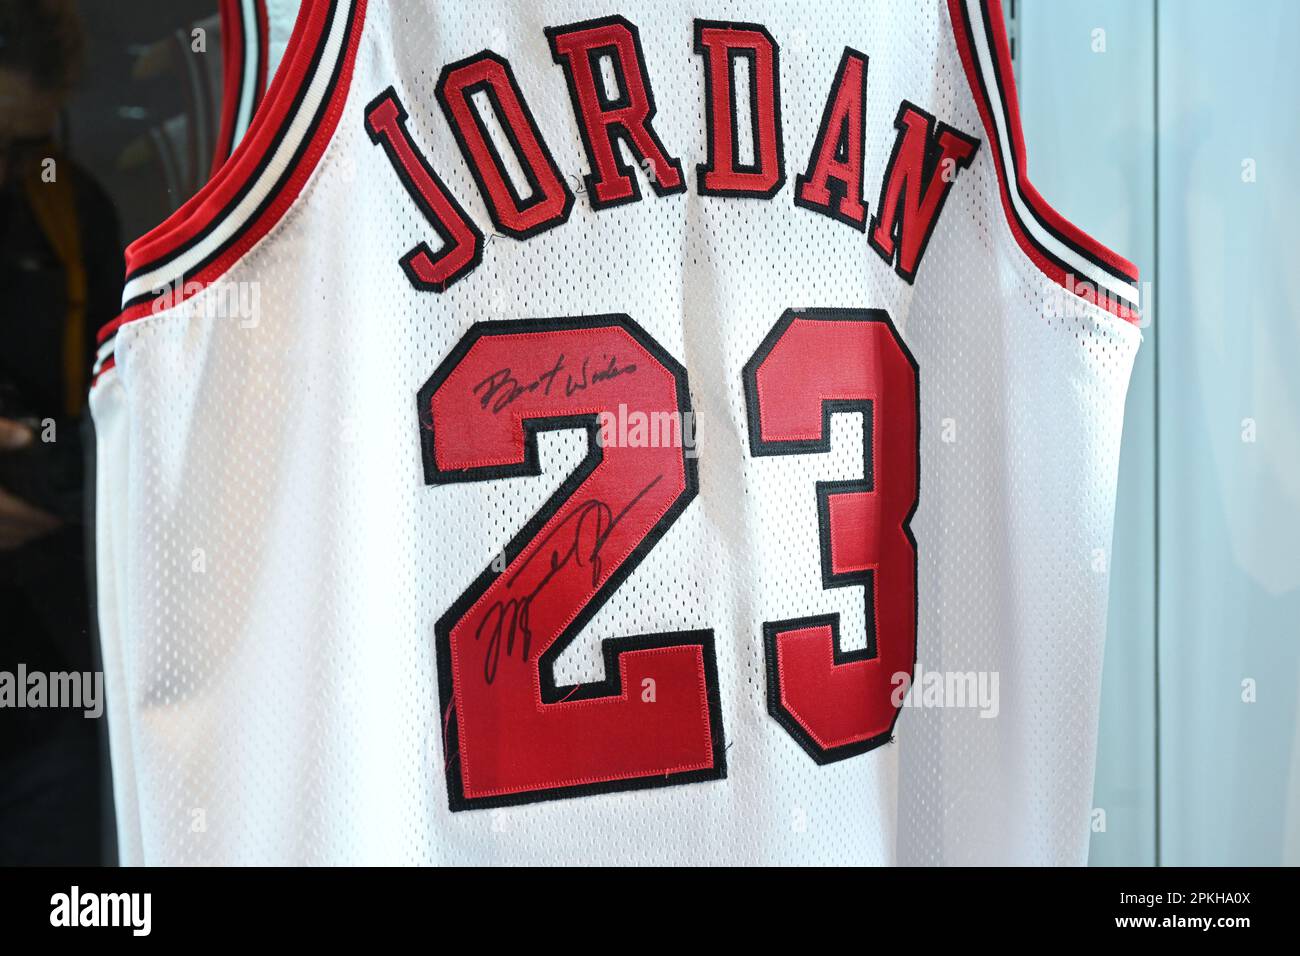 Michael Jordan 1998 'The Last Dance' Chicago Bulls Signed & Game Worn Jersey, Matched to 2 Games, VICTORIAM, PART II, 2023